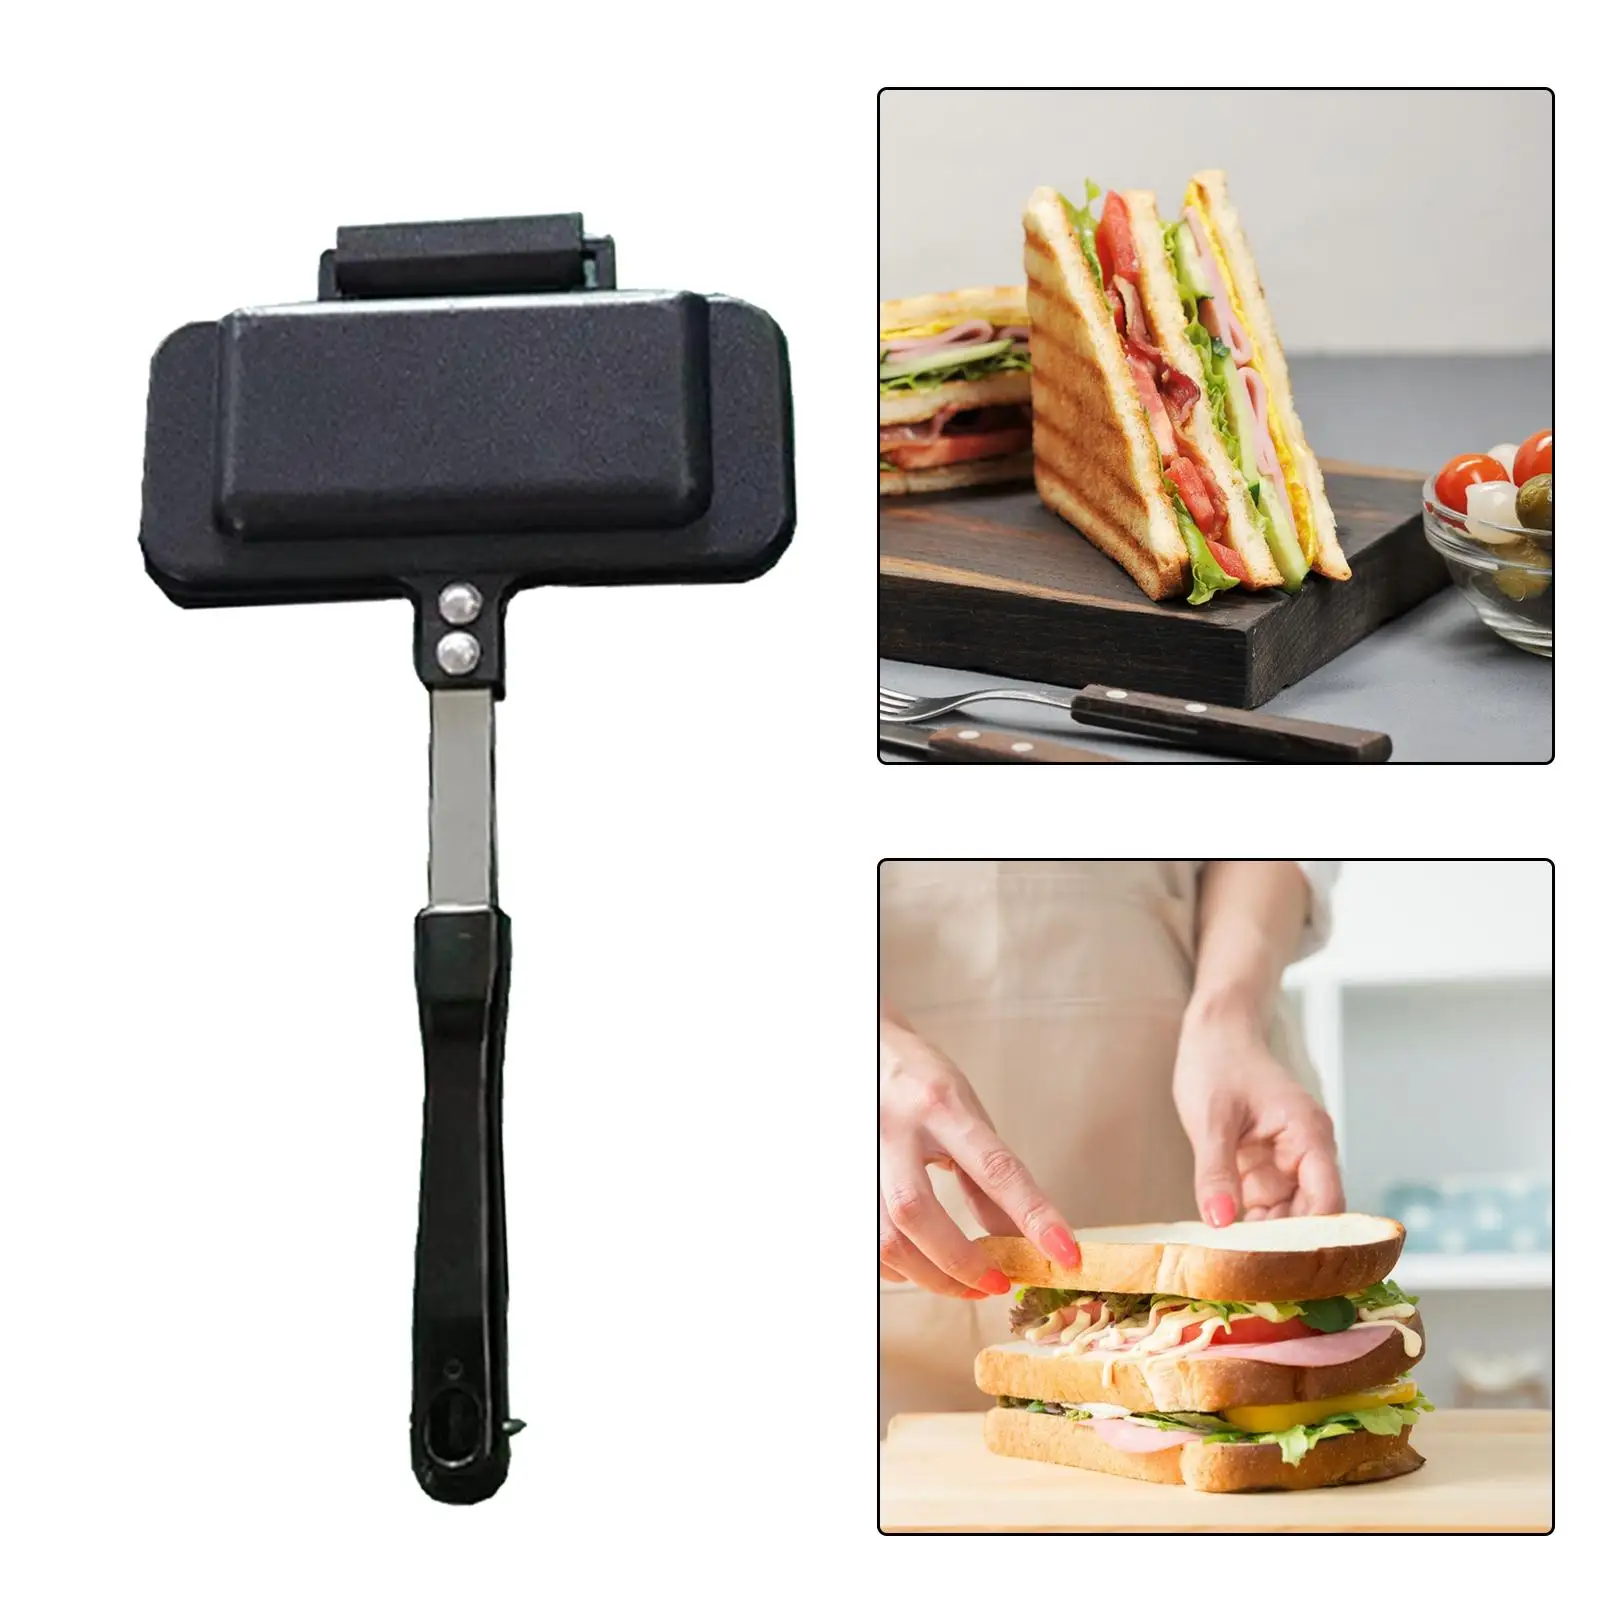 Double Sided Frying Pan Breakfast Sandwich Maker Waffle Pancake Snack Griddle Pan for Frittatas Toast Omelets Bread Dining Room